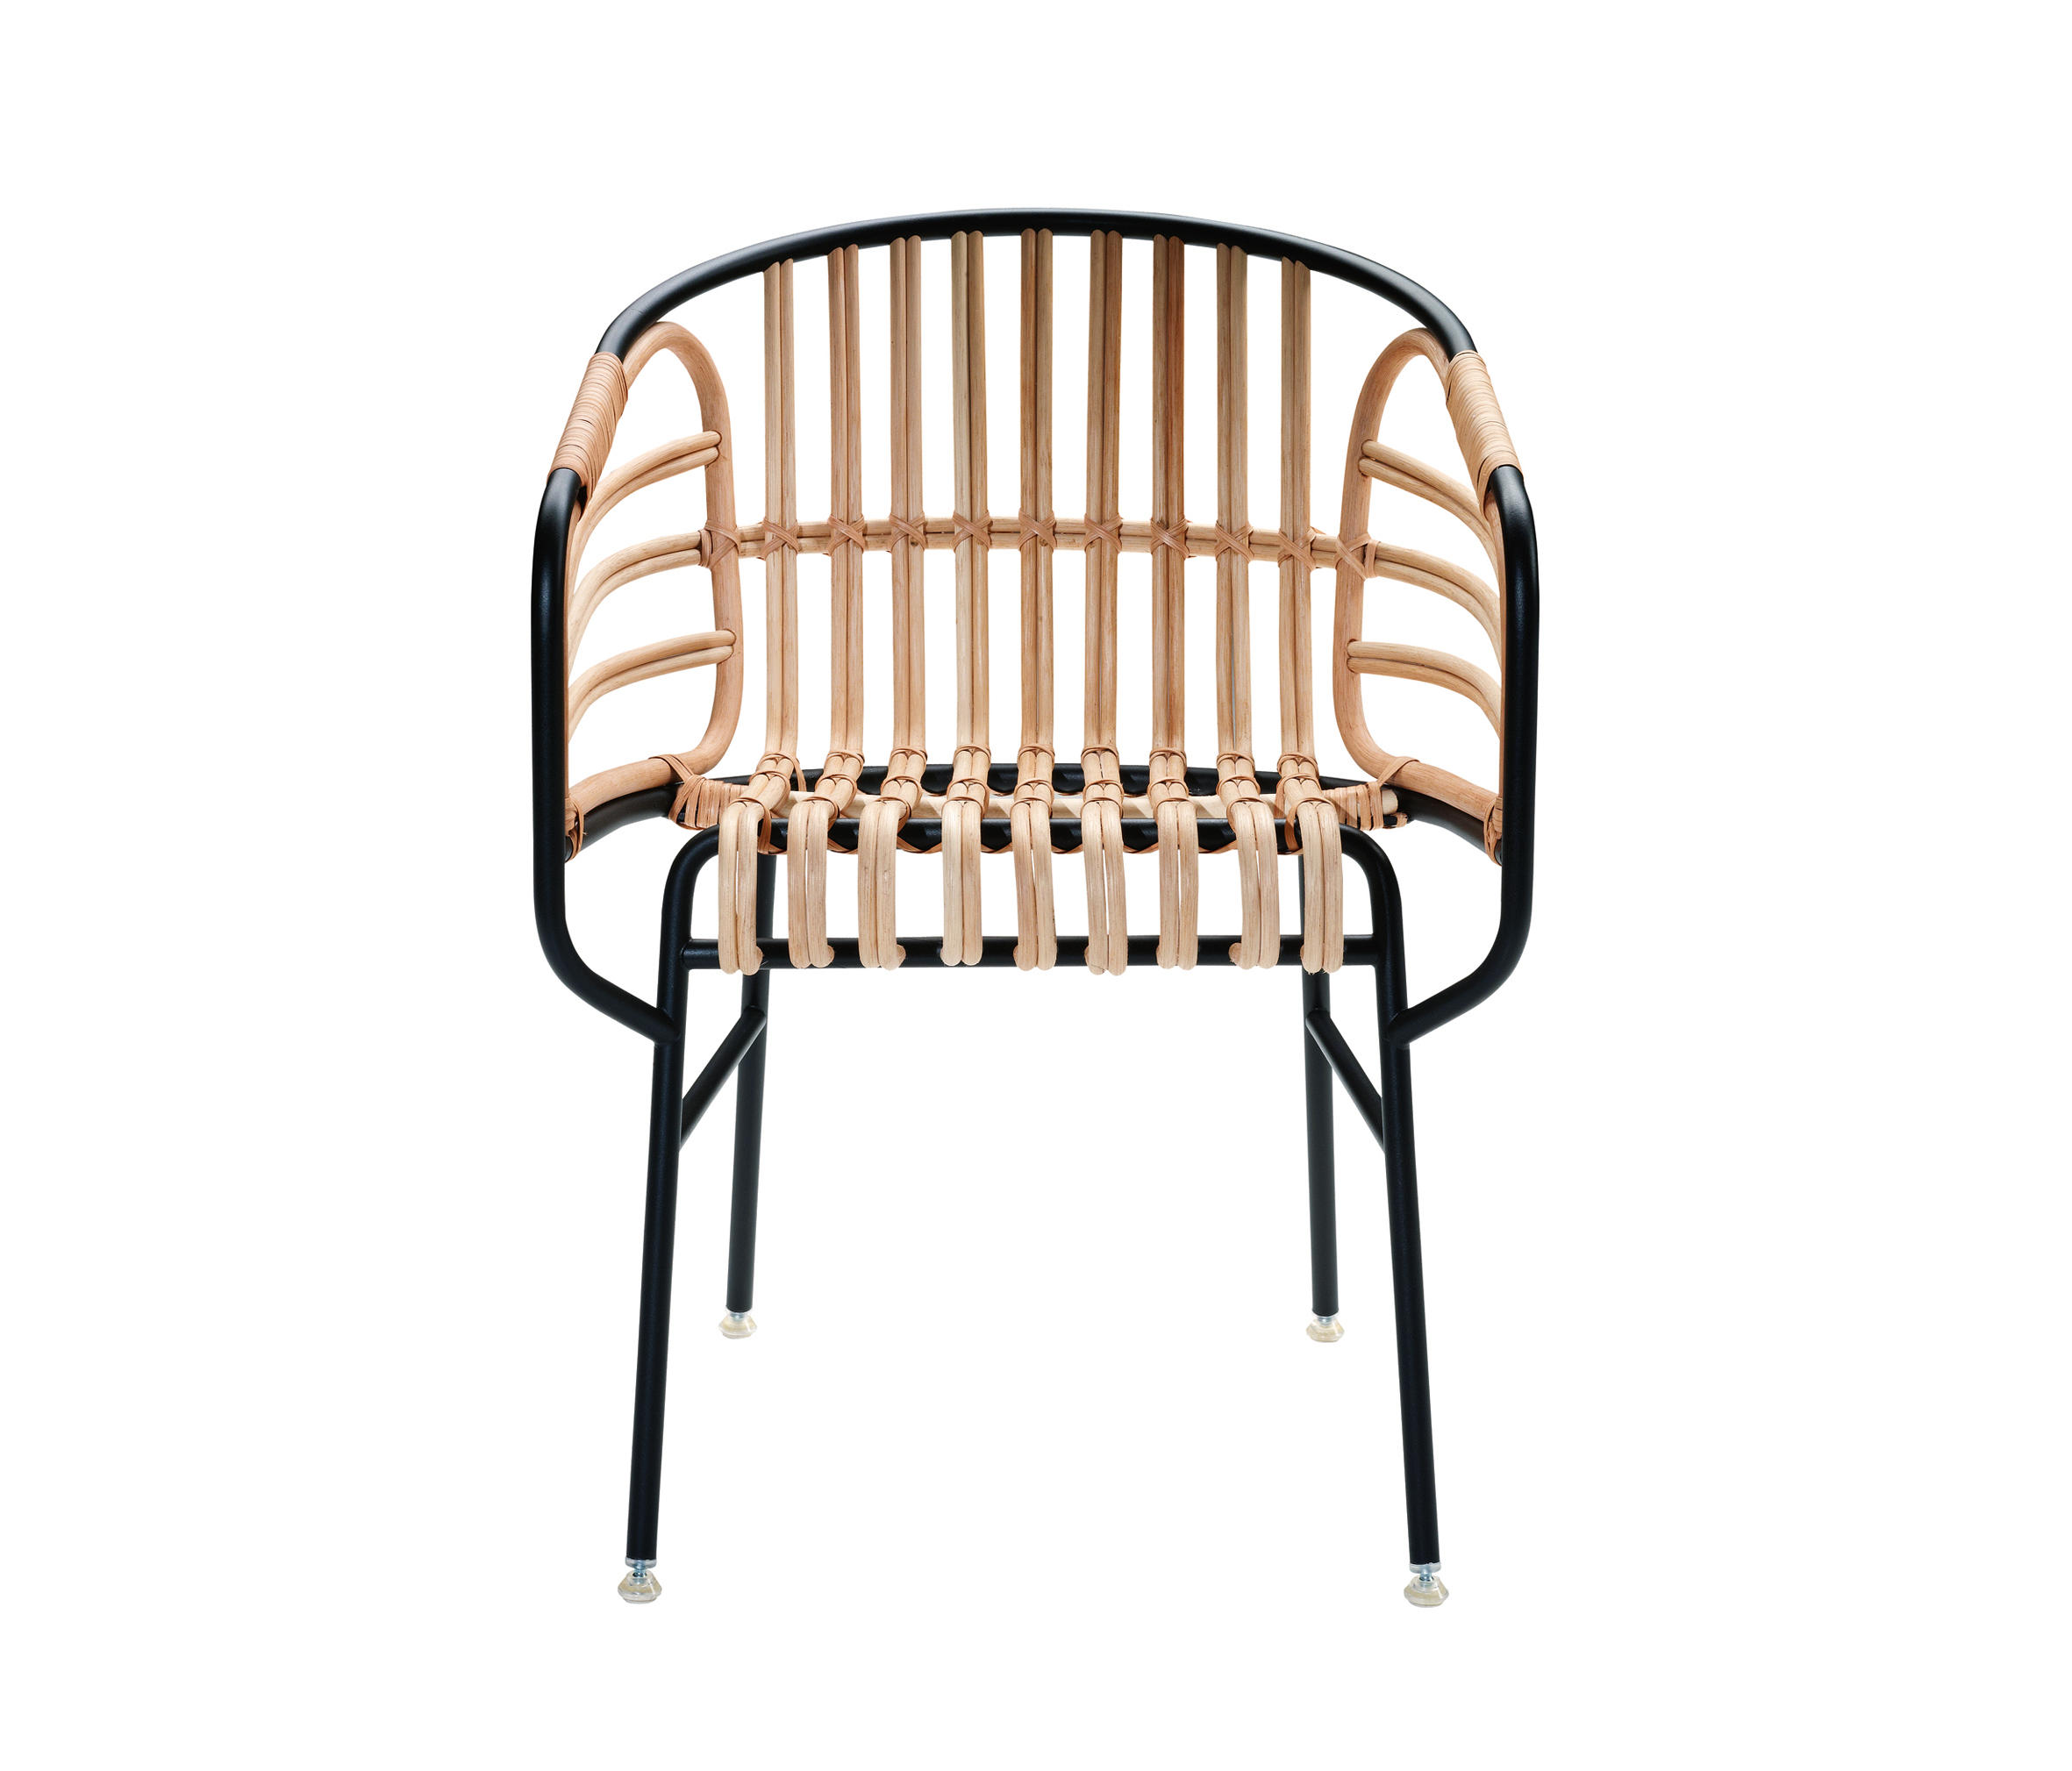 RAPHIA - Chairs from CASAMANIA & HORM | Architonic